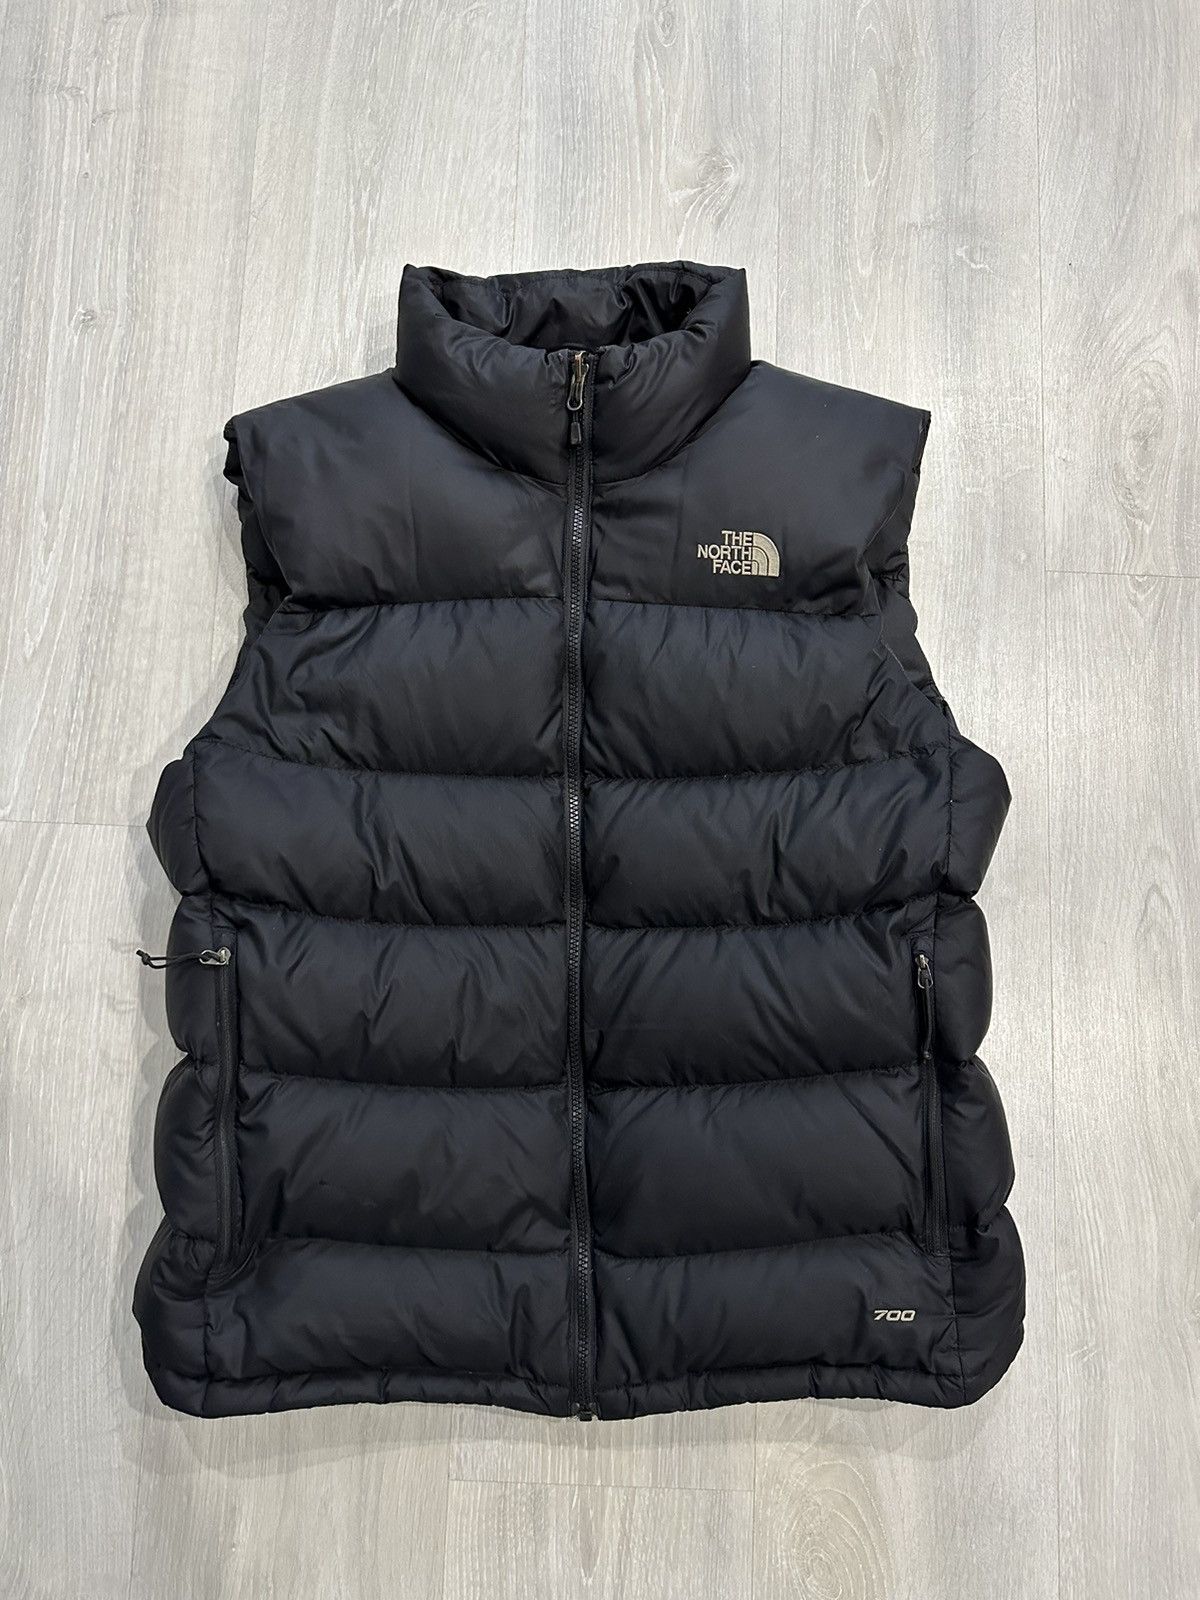 The North Face the north face puffer vest 700 streetwear y2k gorp-core ...